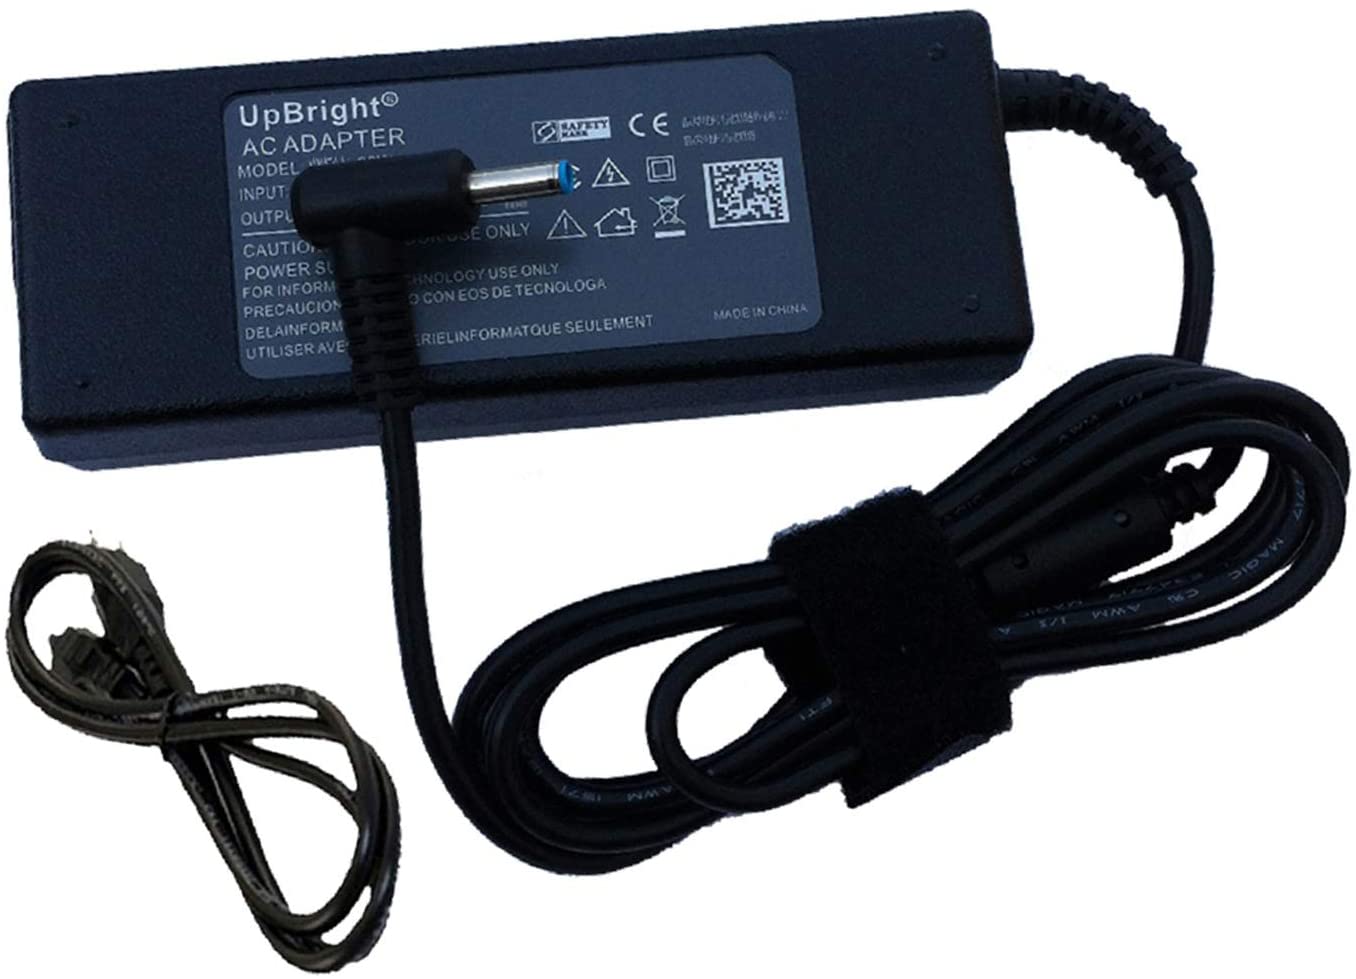 UPBRIGHT NEW AC / DC Adapter For HP 15-r006tu 15-r017tu 15-r020ns 15-r002tu 15-r003tu 15-r004tu 15-r006tu 15-r017tu 15-r020ns 15.6" Laptop Notebook Computers Battery Charger Power Supply Cord Cable PS - image 1 of 3